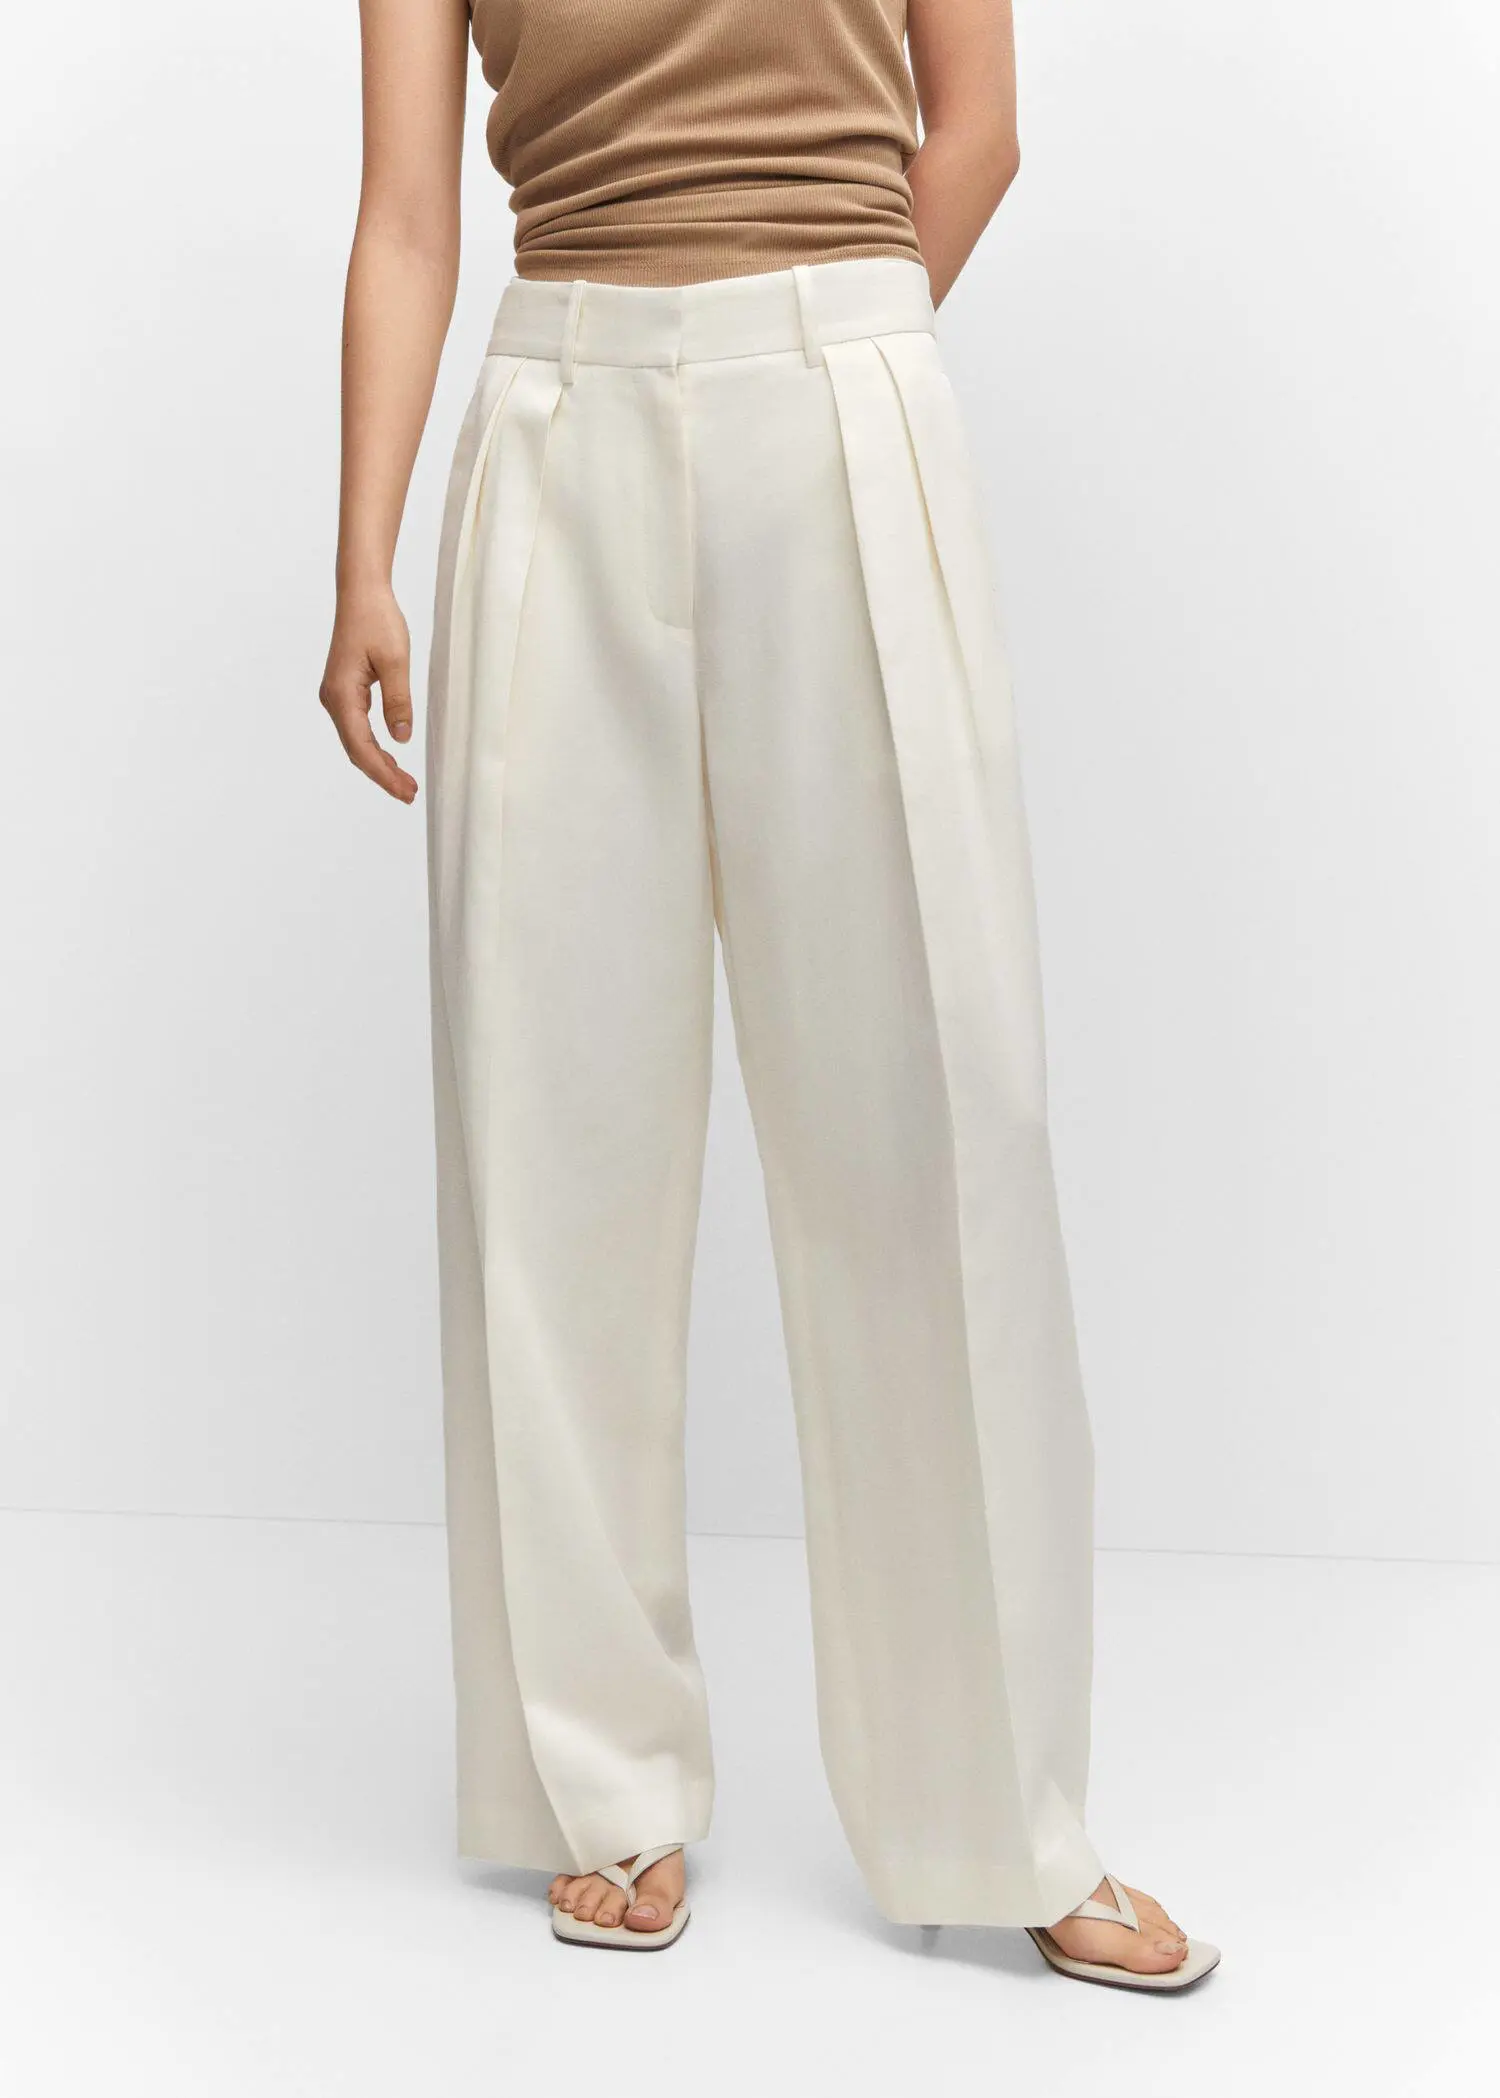 Mango Wideleg pleated pants. a person wearing white pants and a white top. 